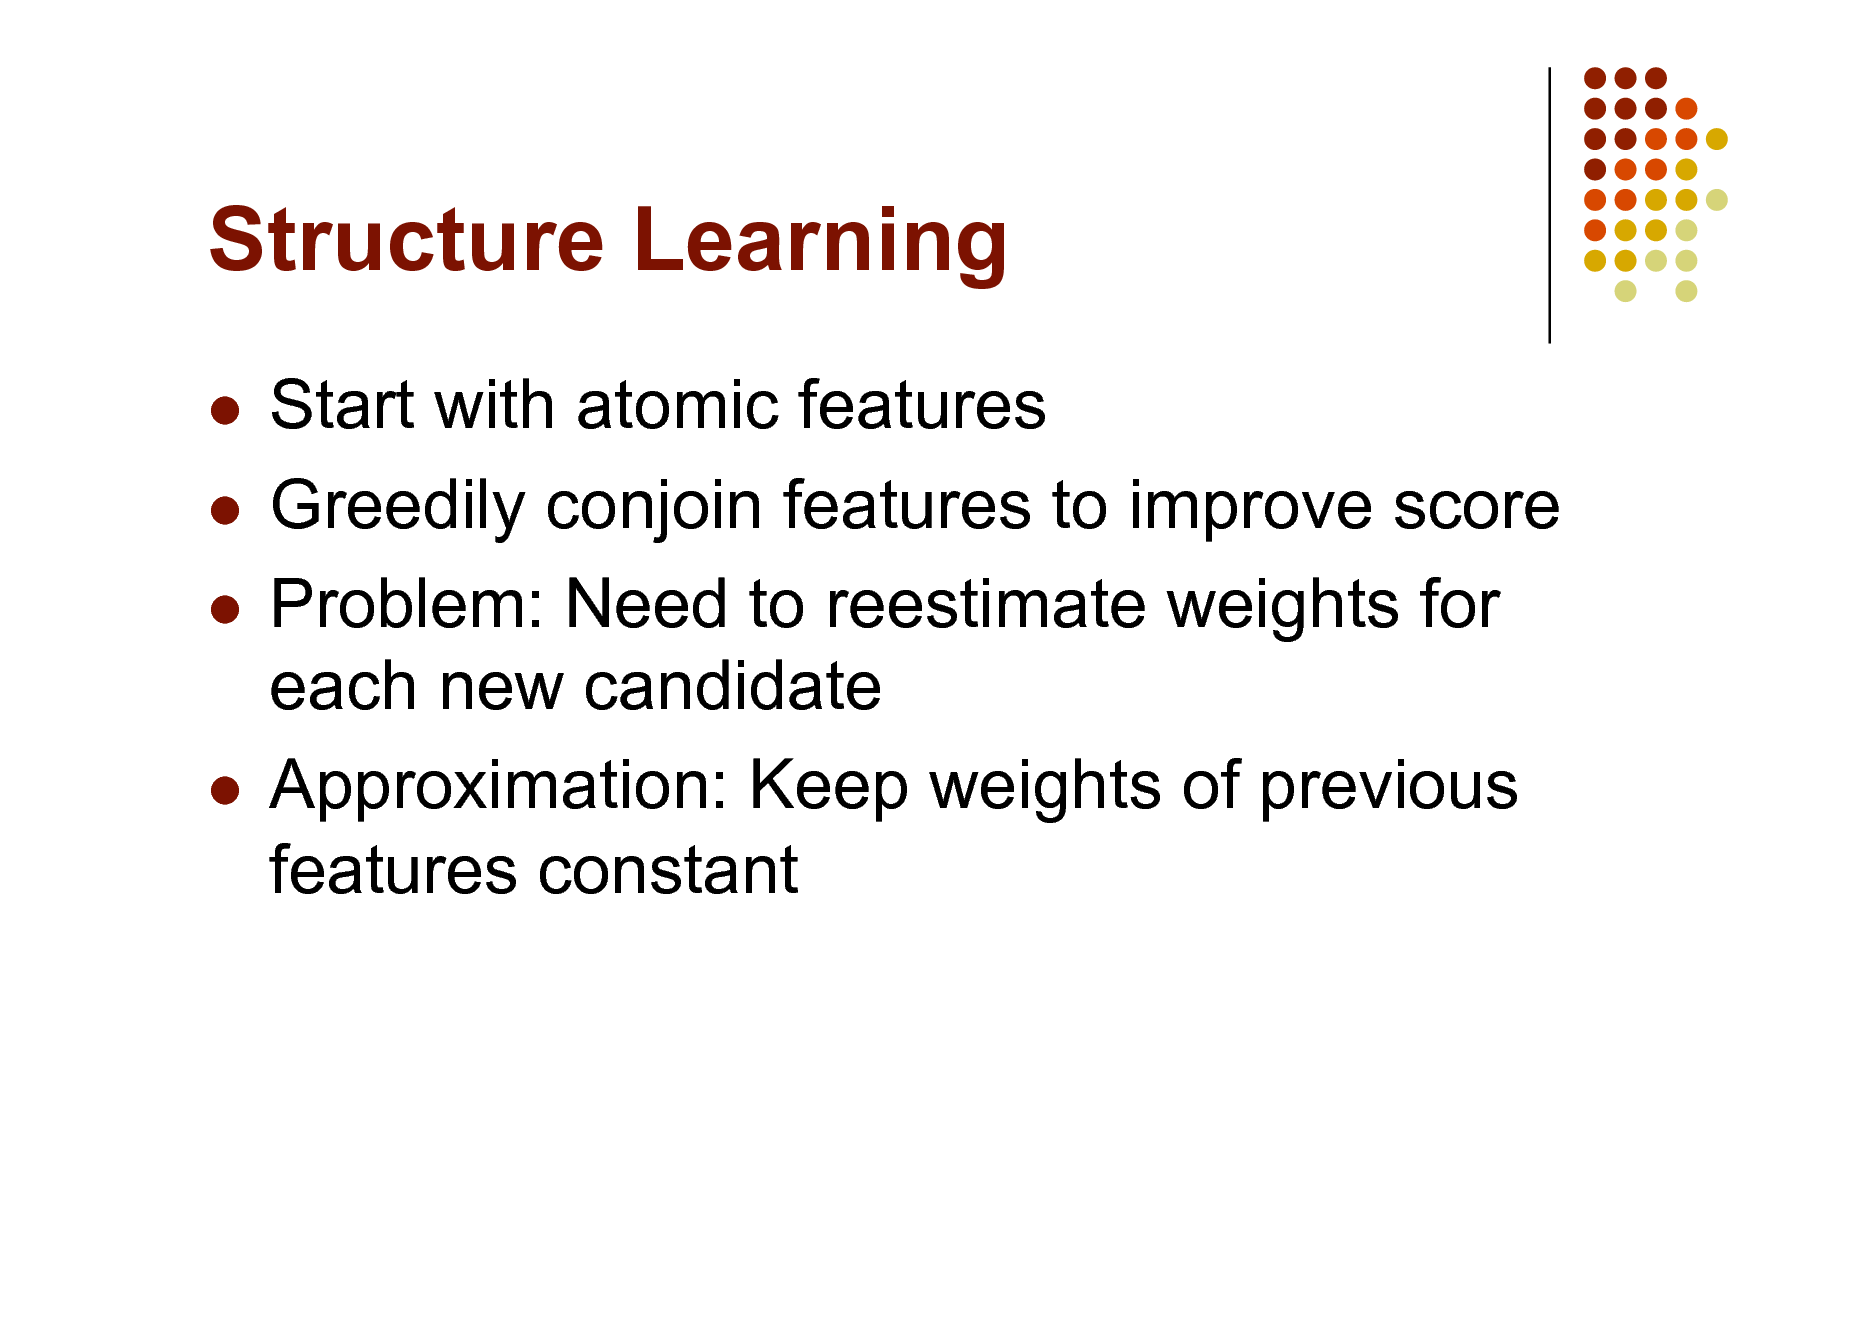 Slide: Structure Learning
Start with atomic features  Greedily conjoin features to improve score  Problem: Need to reestimate weights for each new candidate  Approximation: Keep weights of previous features constant


